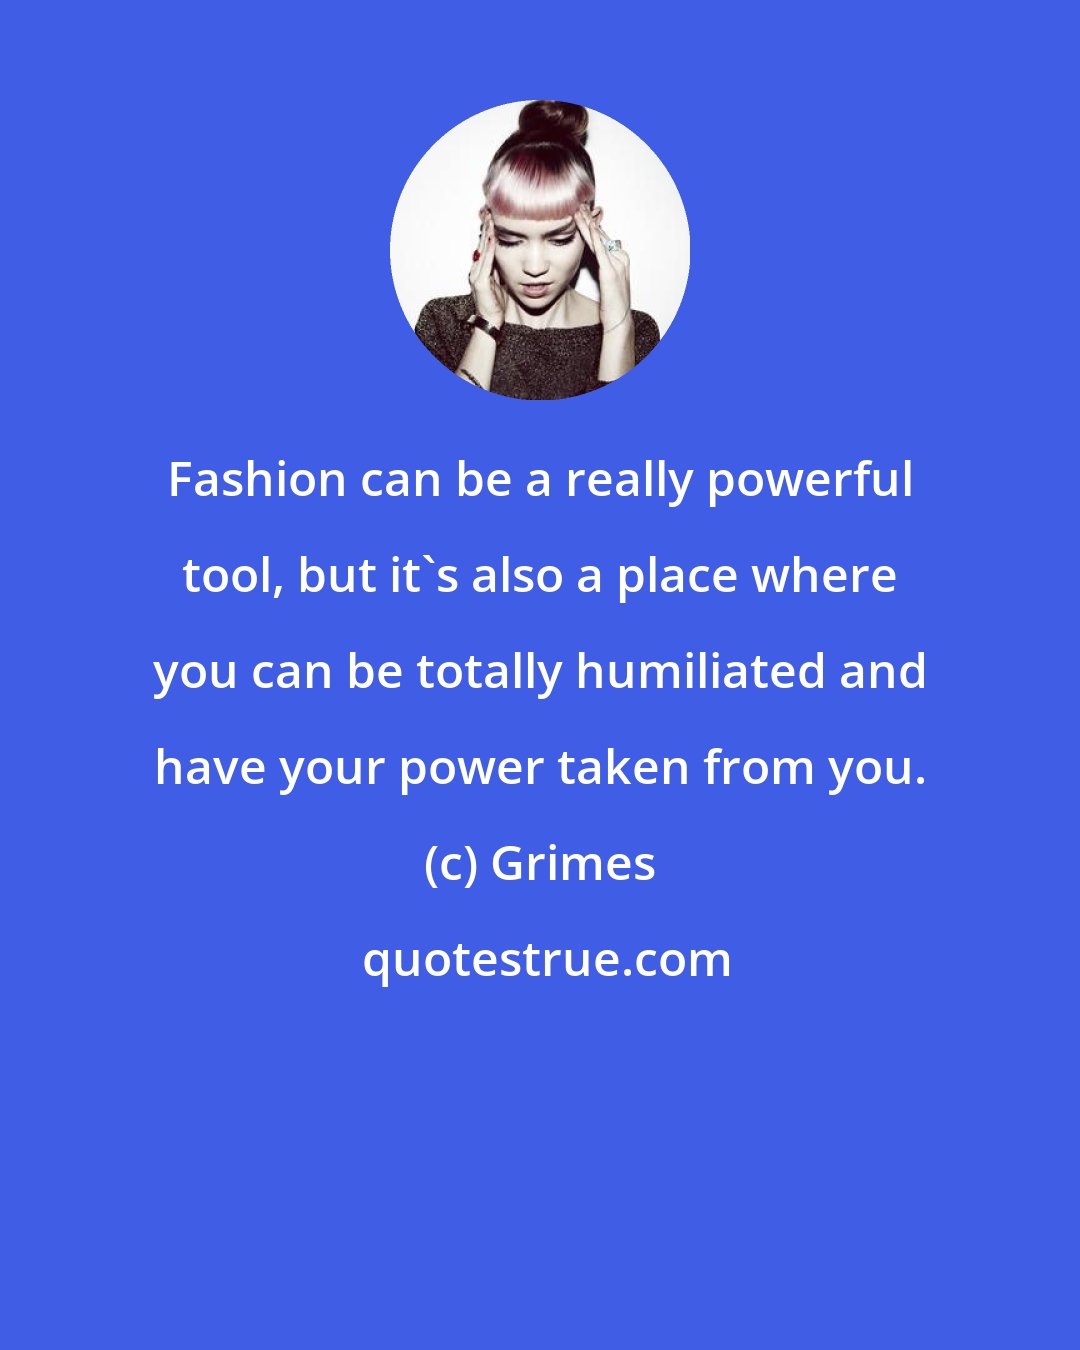 Grimes: Fashion can be a really powerful tool, but it's also a place where you can be totally humiliated and have your power taken from you.